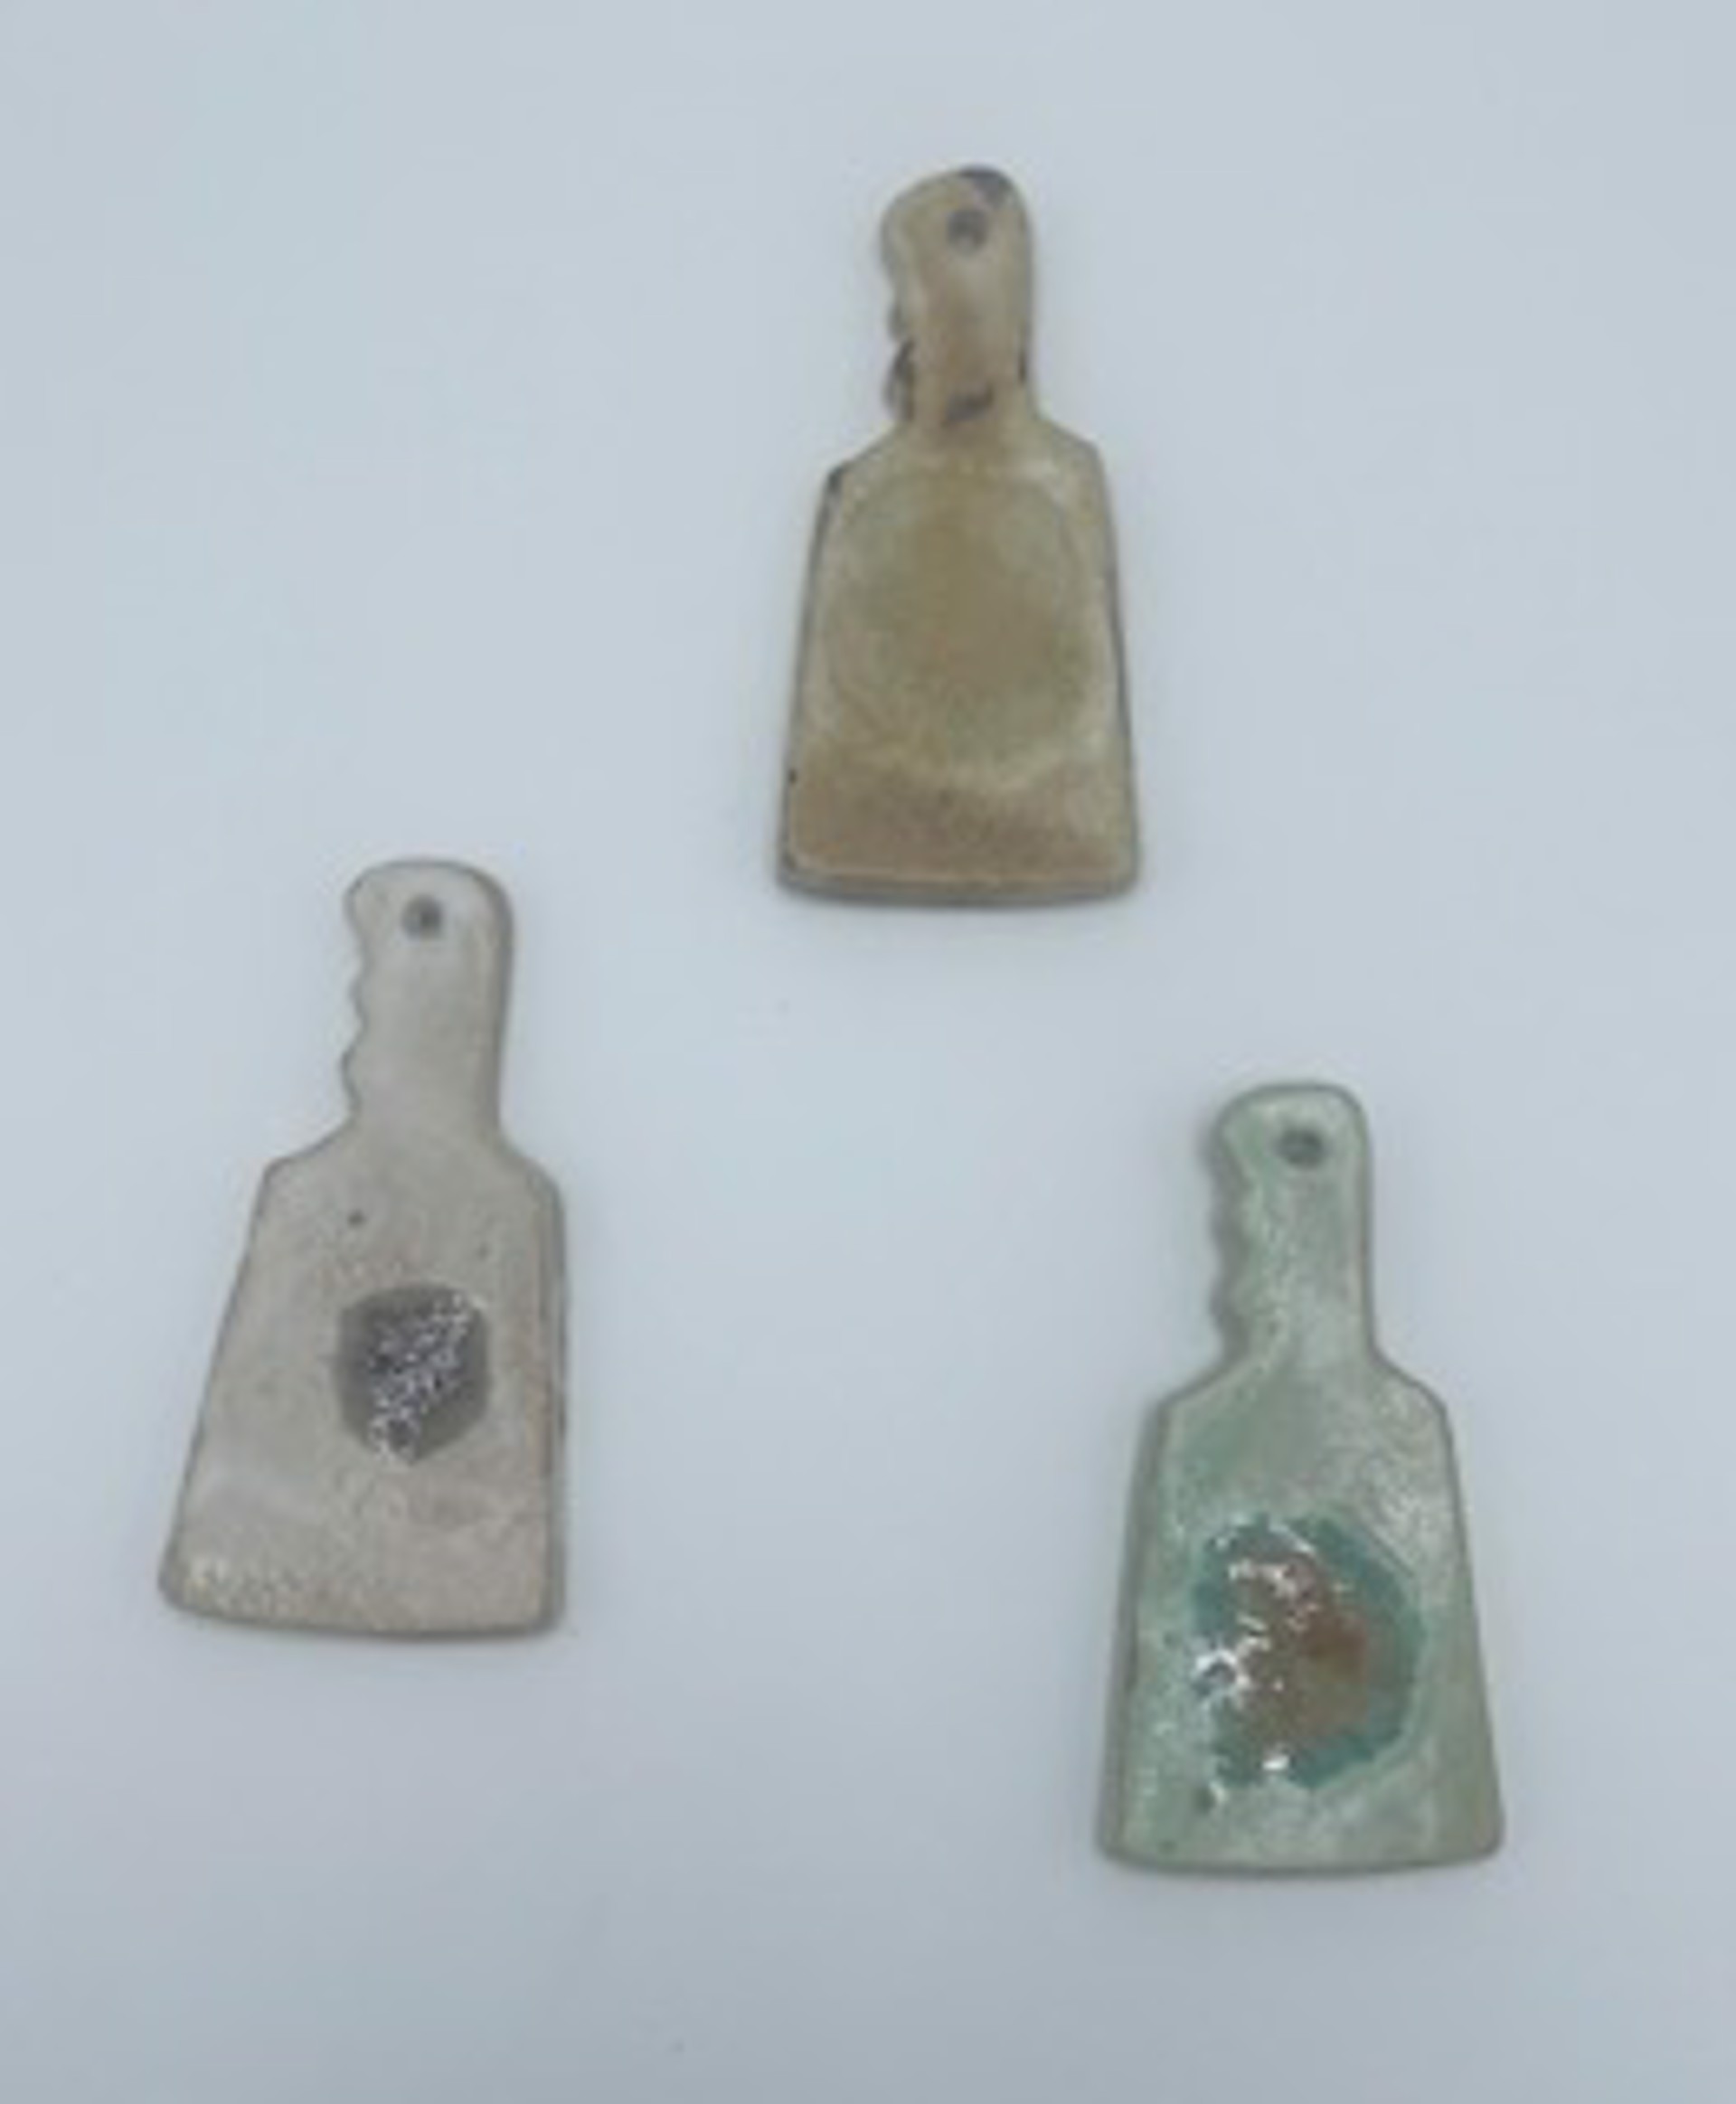 Cowbell Ornament Assorted Glazes by Satterfield Pottery